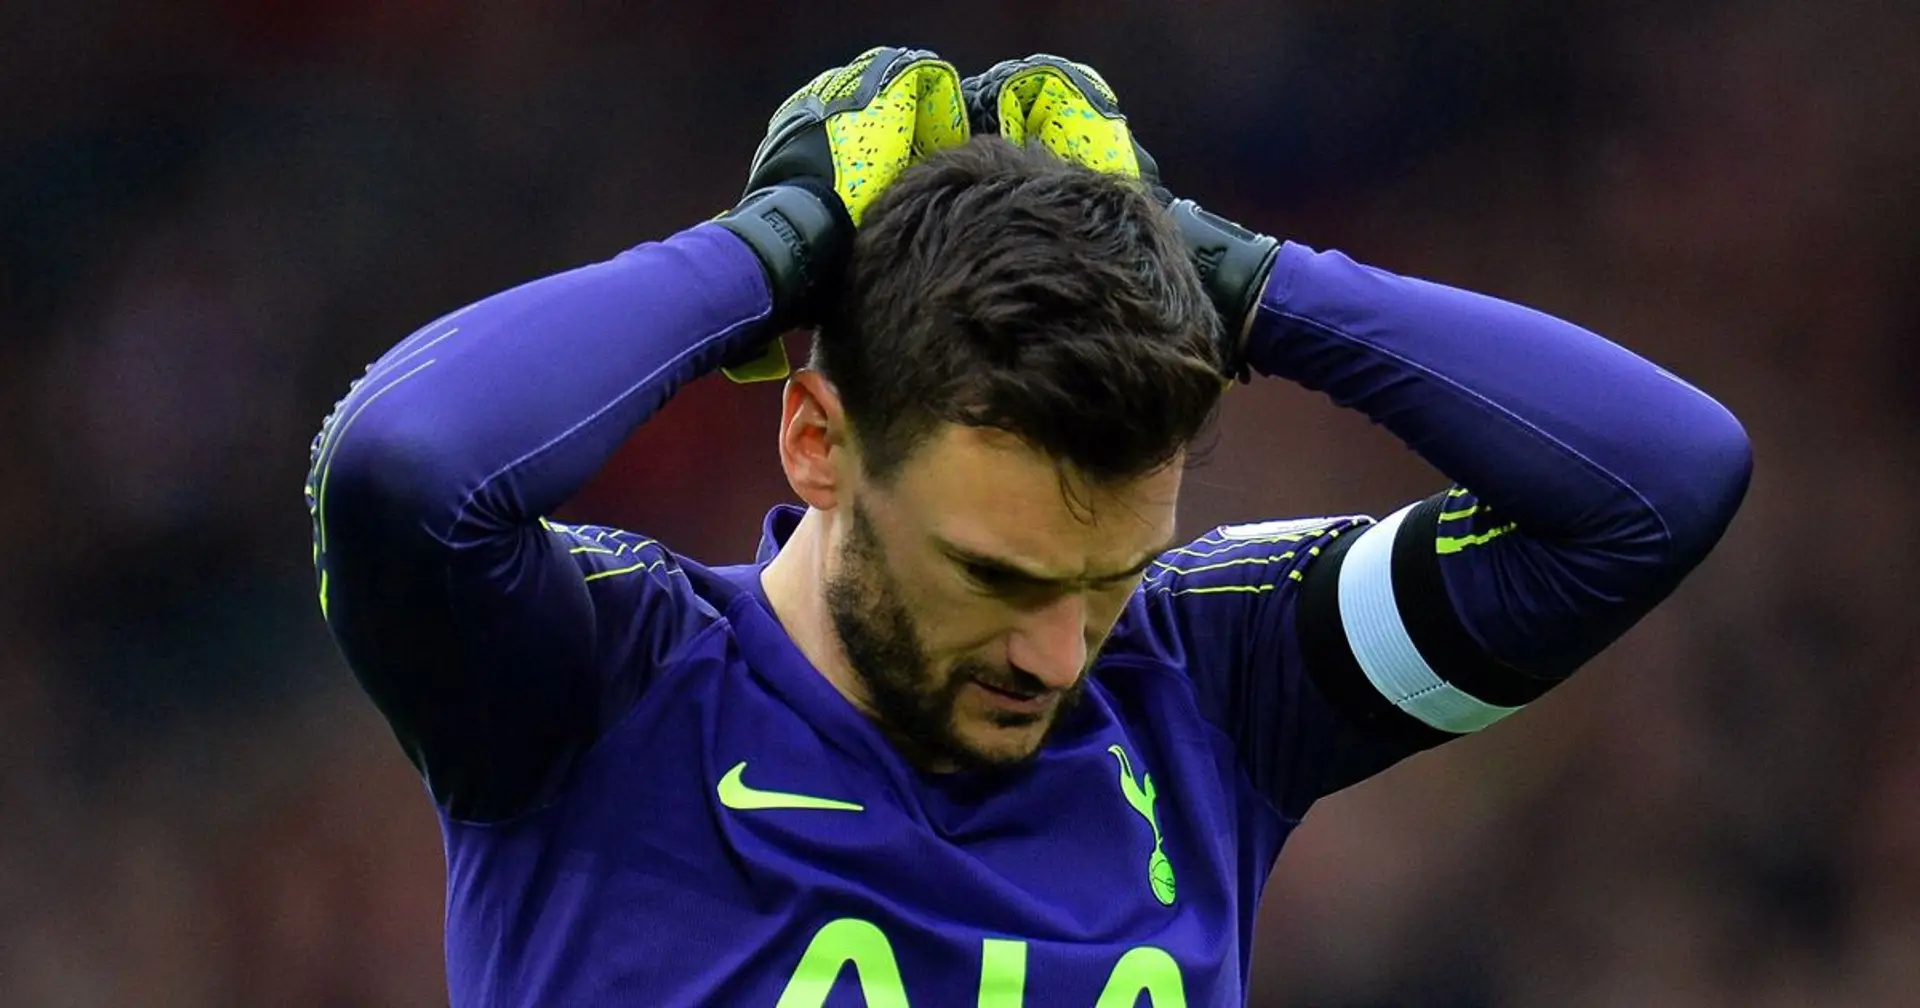 'We don't have the right to lose games': Spurs captain Lloris understands United clash will decide top 4 race